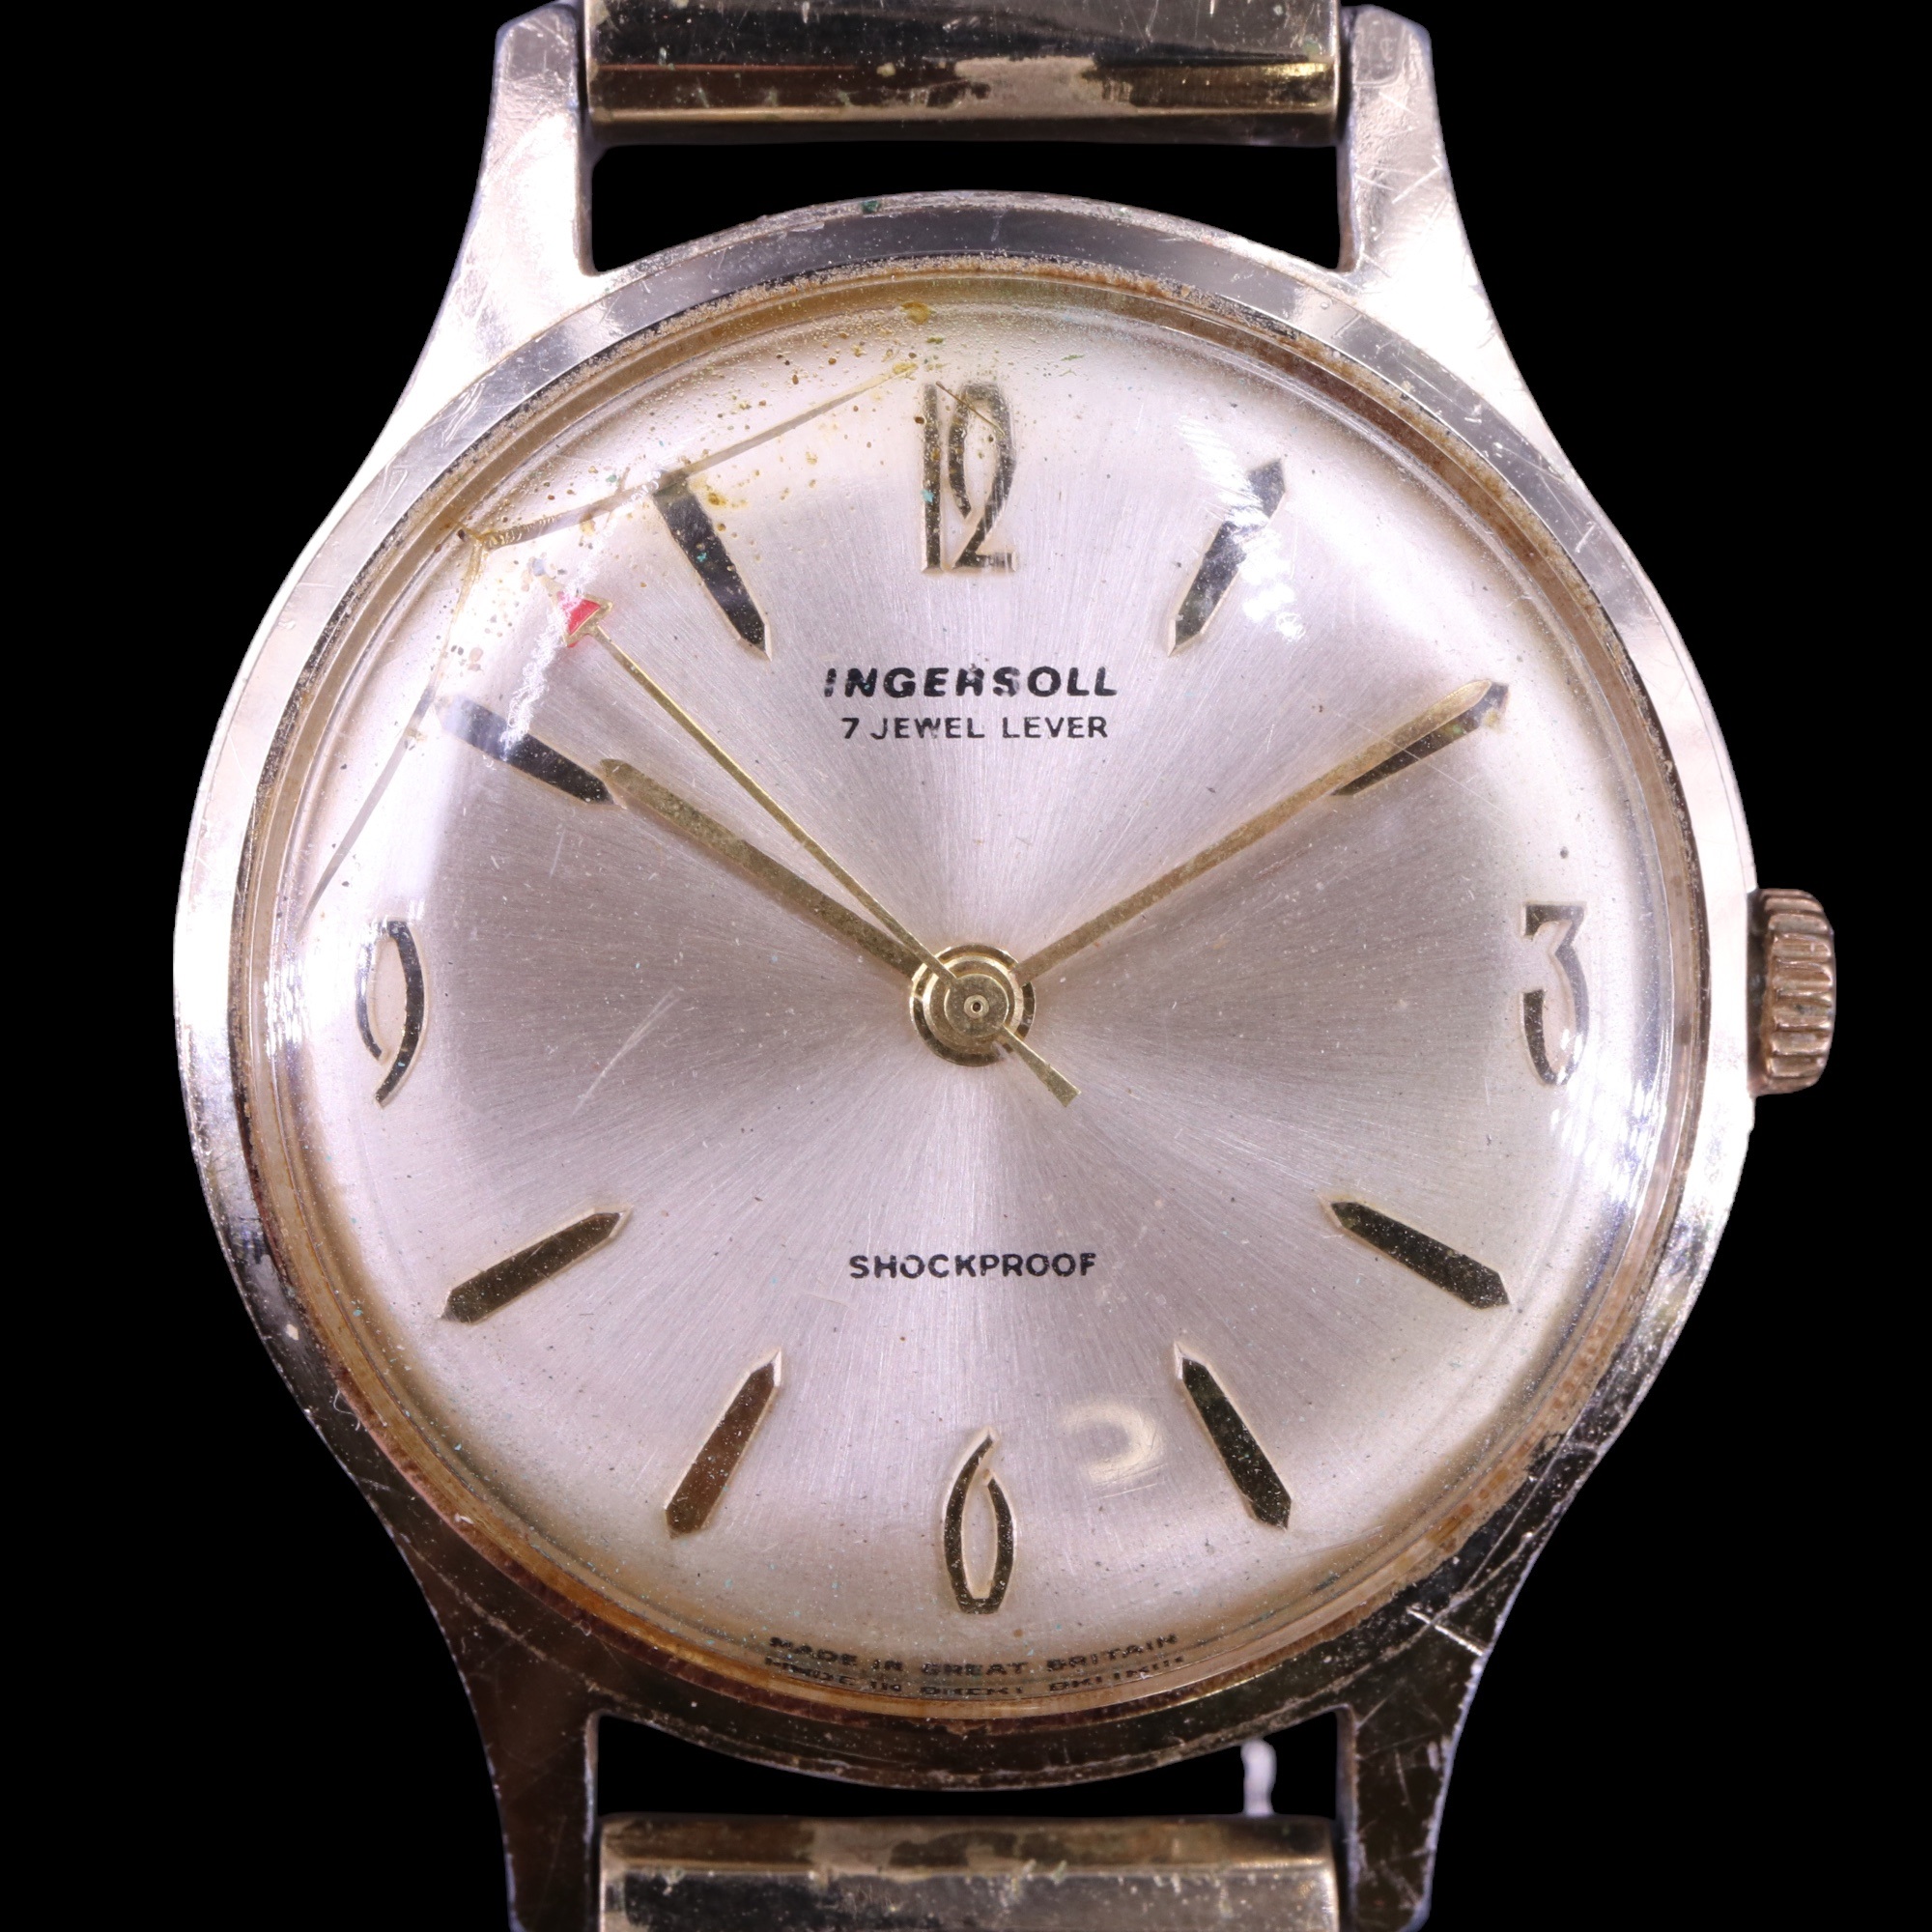 A vintage Ingersoll gold-plated wristwatch, having a crown-wound 7-jewel movement, radially